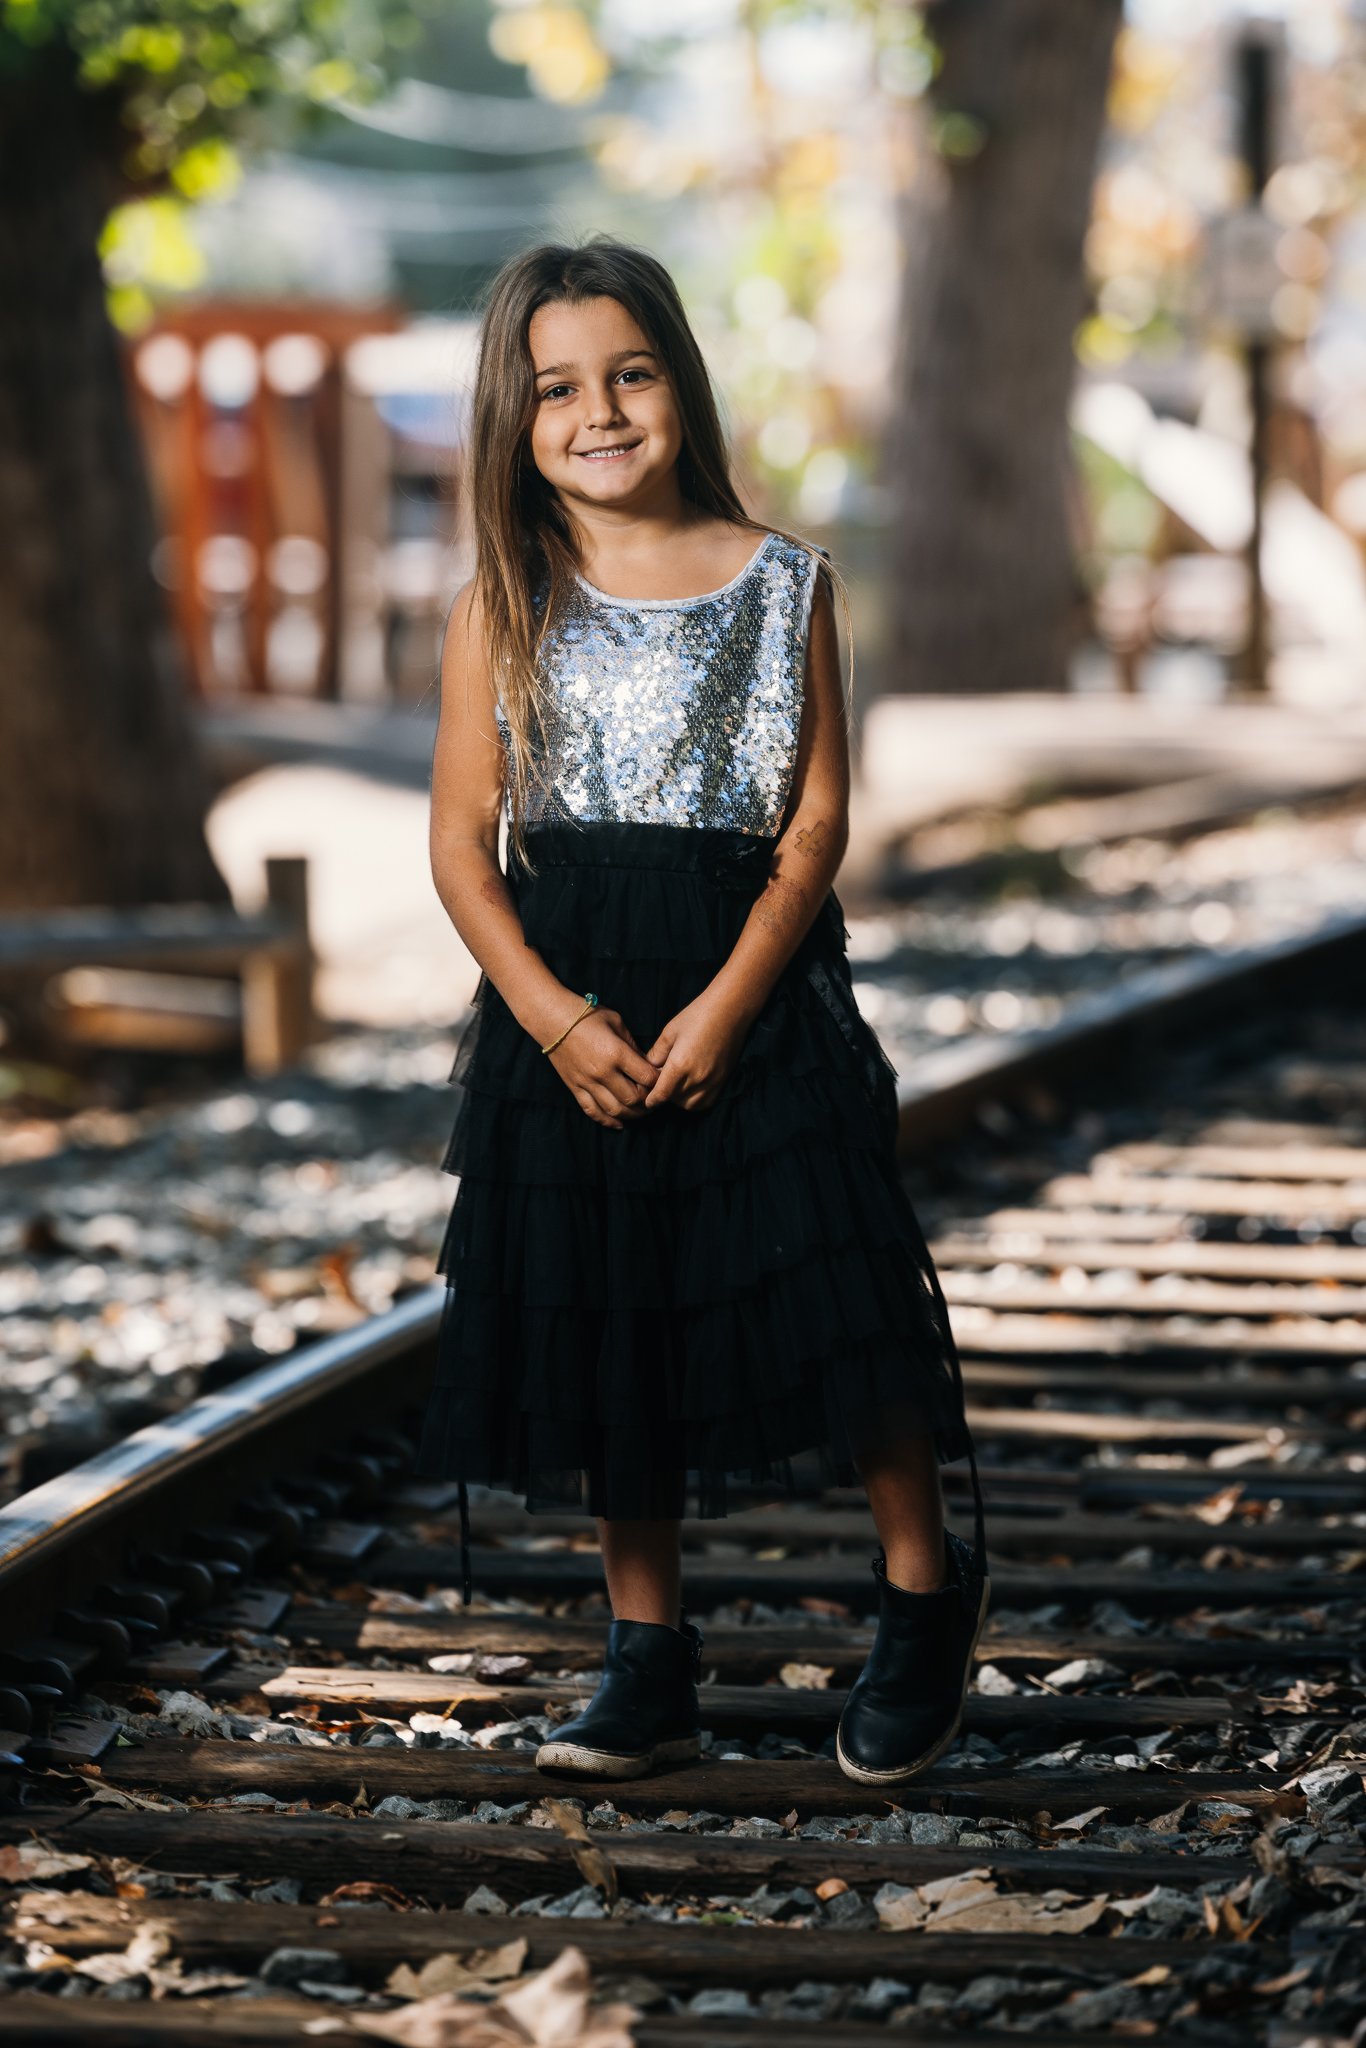 Old Poway Park | Southern California Family Portrait Photo Session-50.jpg